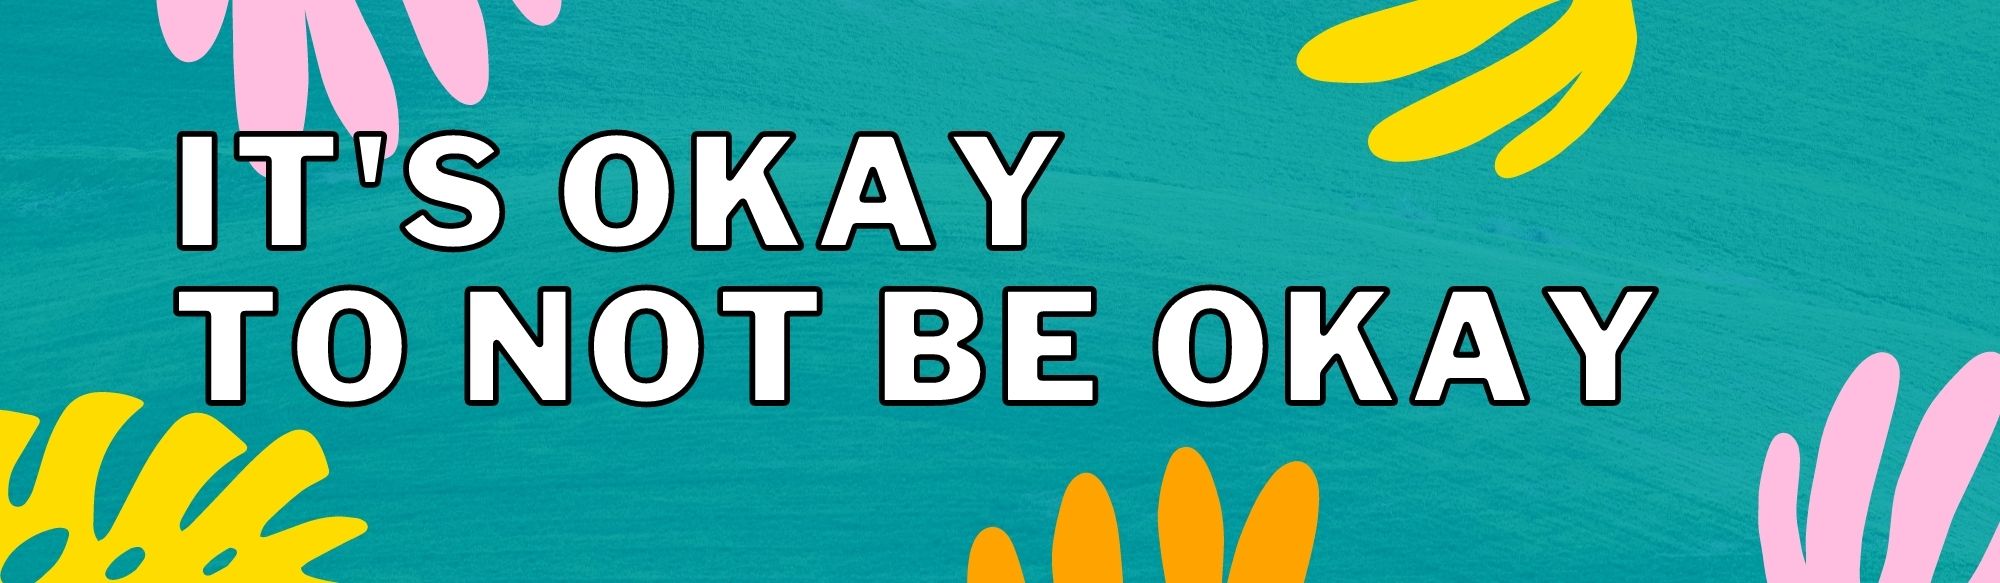 Graphic with the text "it's okay to not be okay" on top of a blue background with yellow, pink, and orange leaves around.